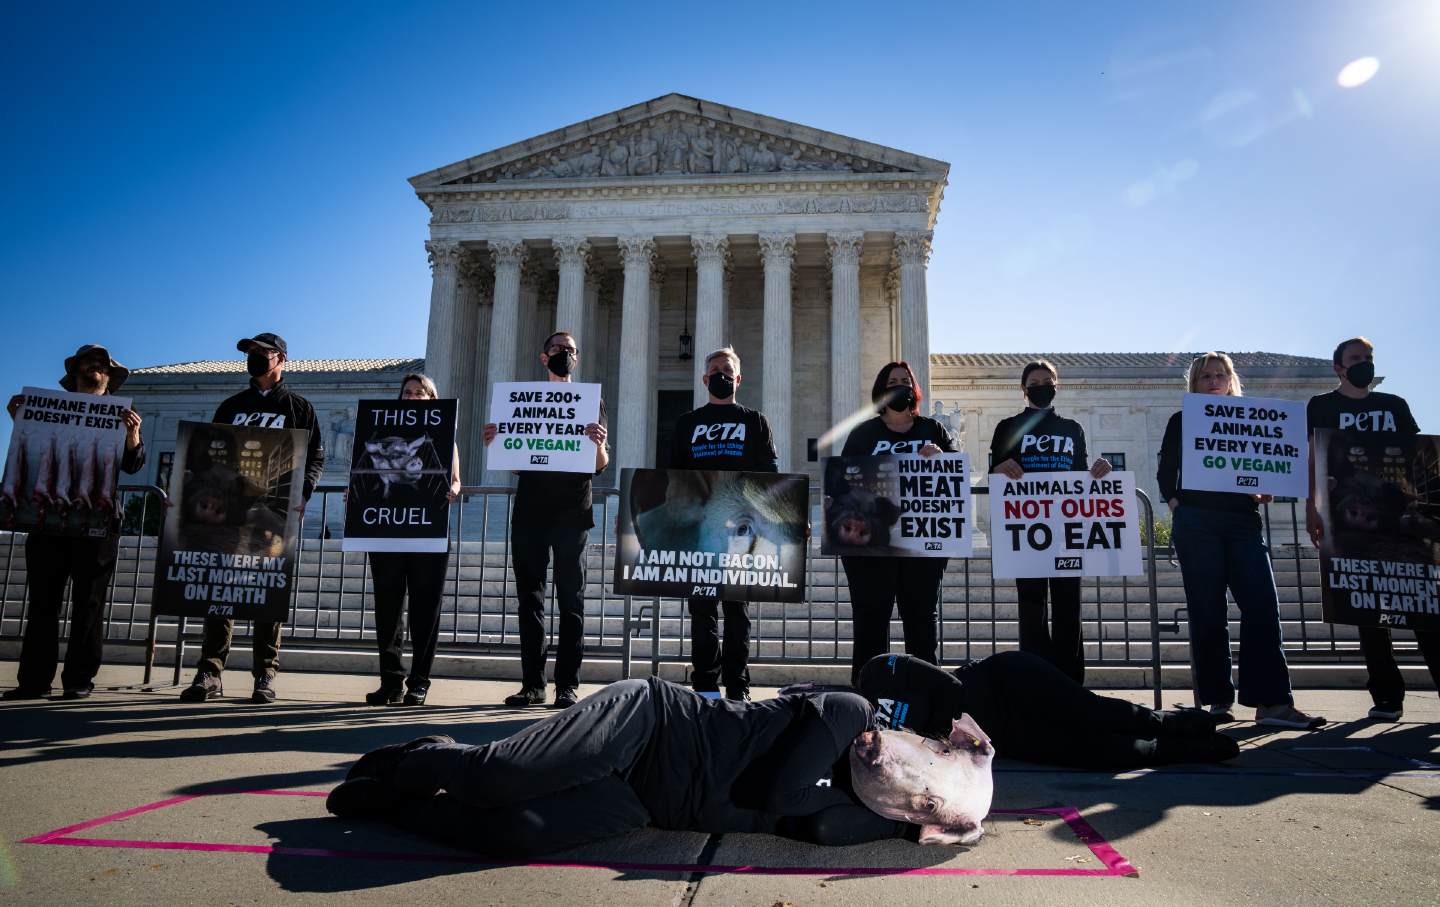 How a Supreme Court Case About Pigs Could Further Undermine… Abortion Rights